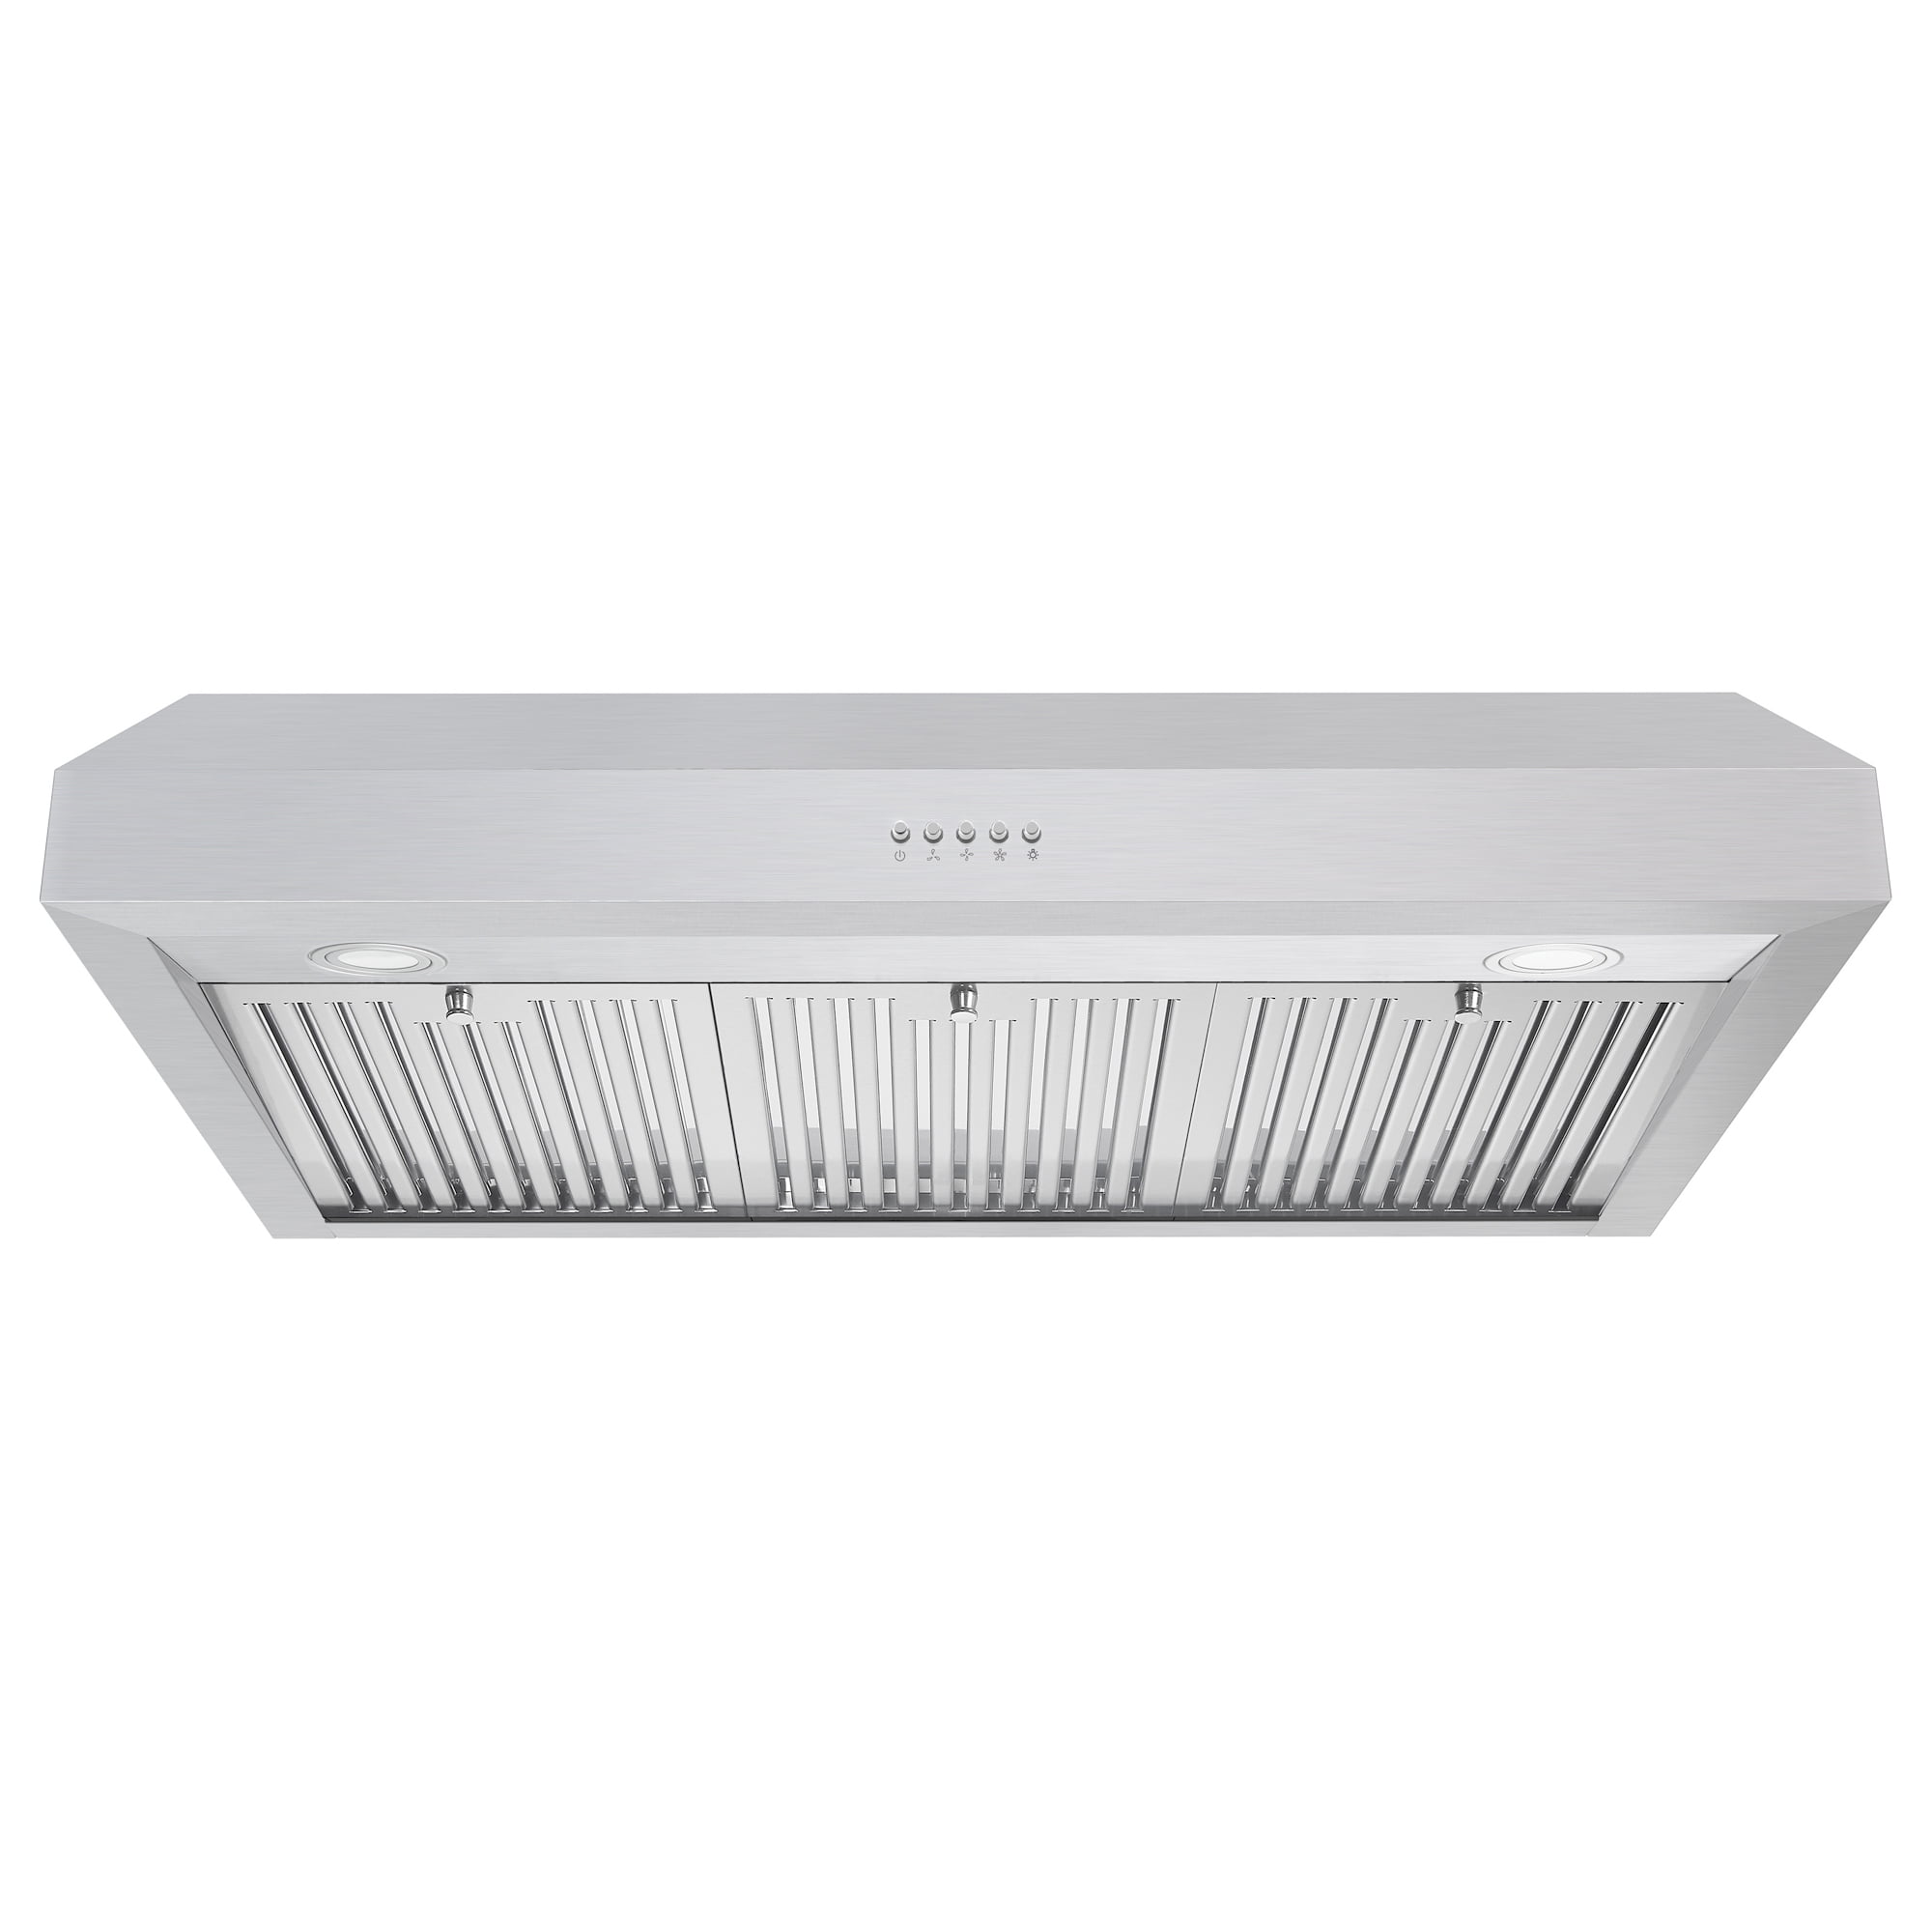 FIREGAS 30 inch Under Cabinet Range Hood with Ducted / Ductless